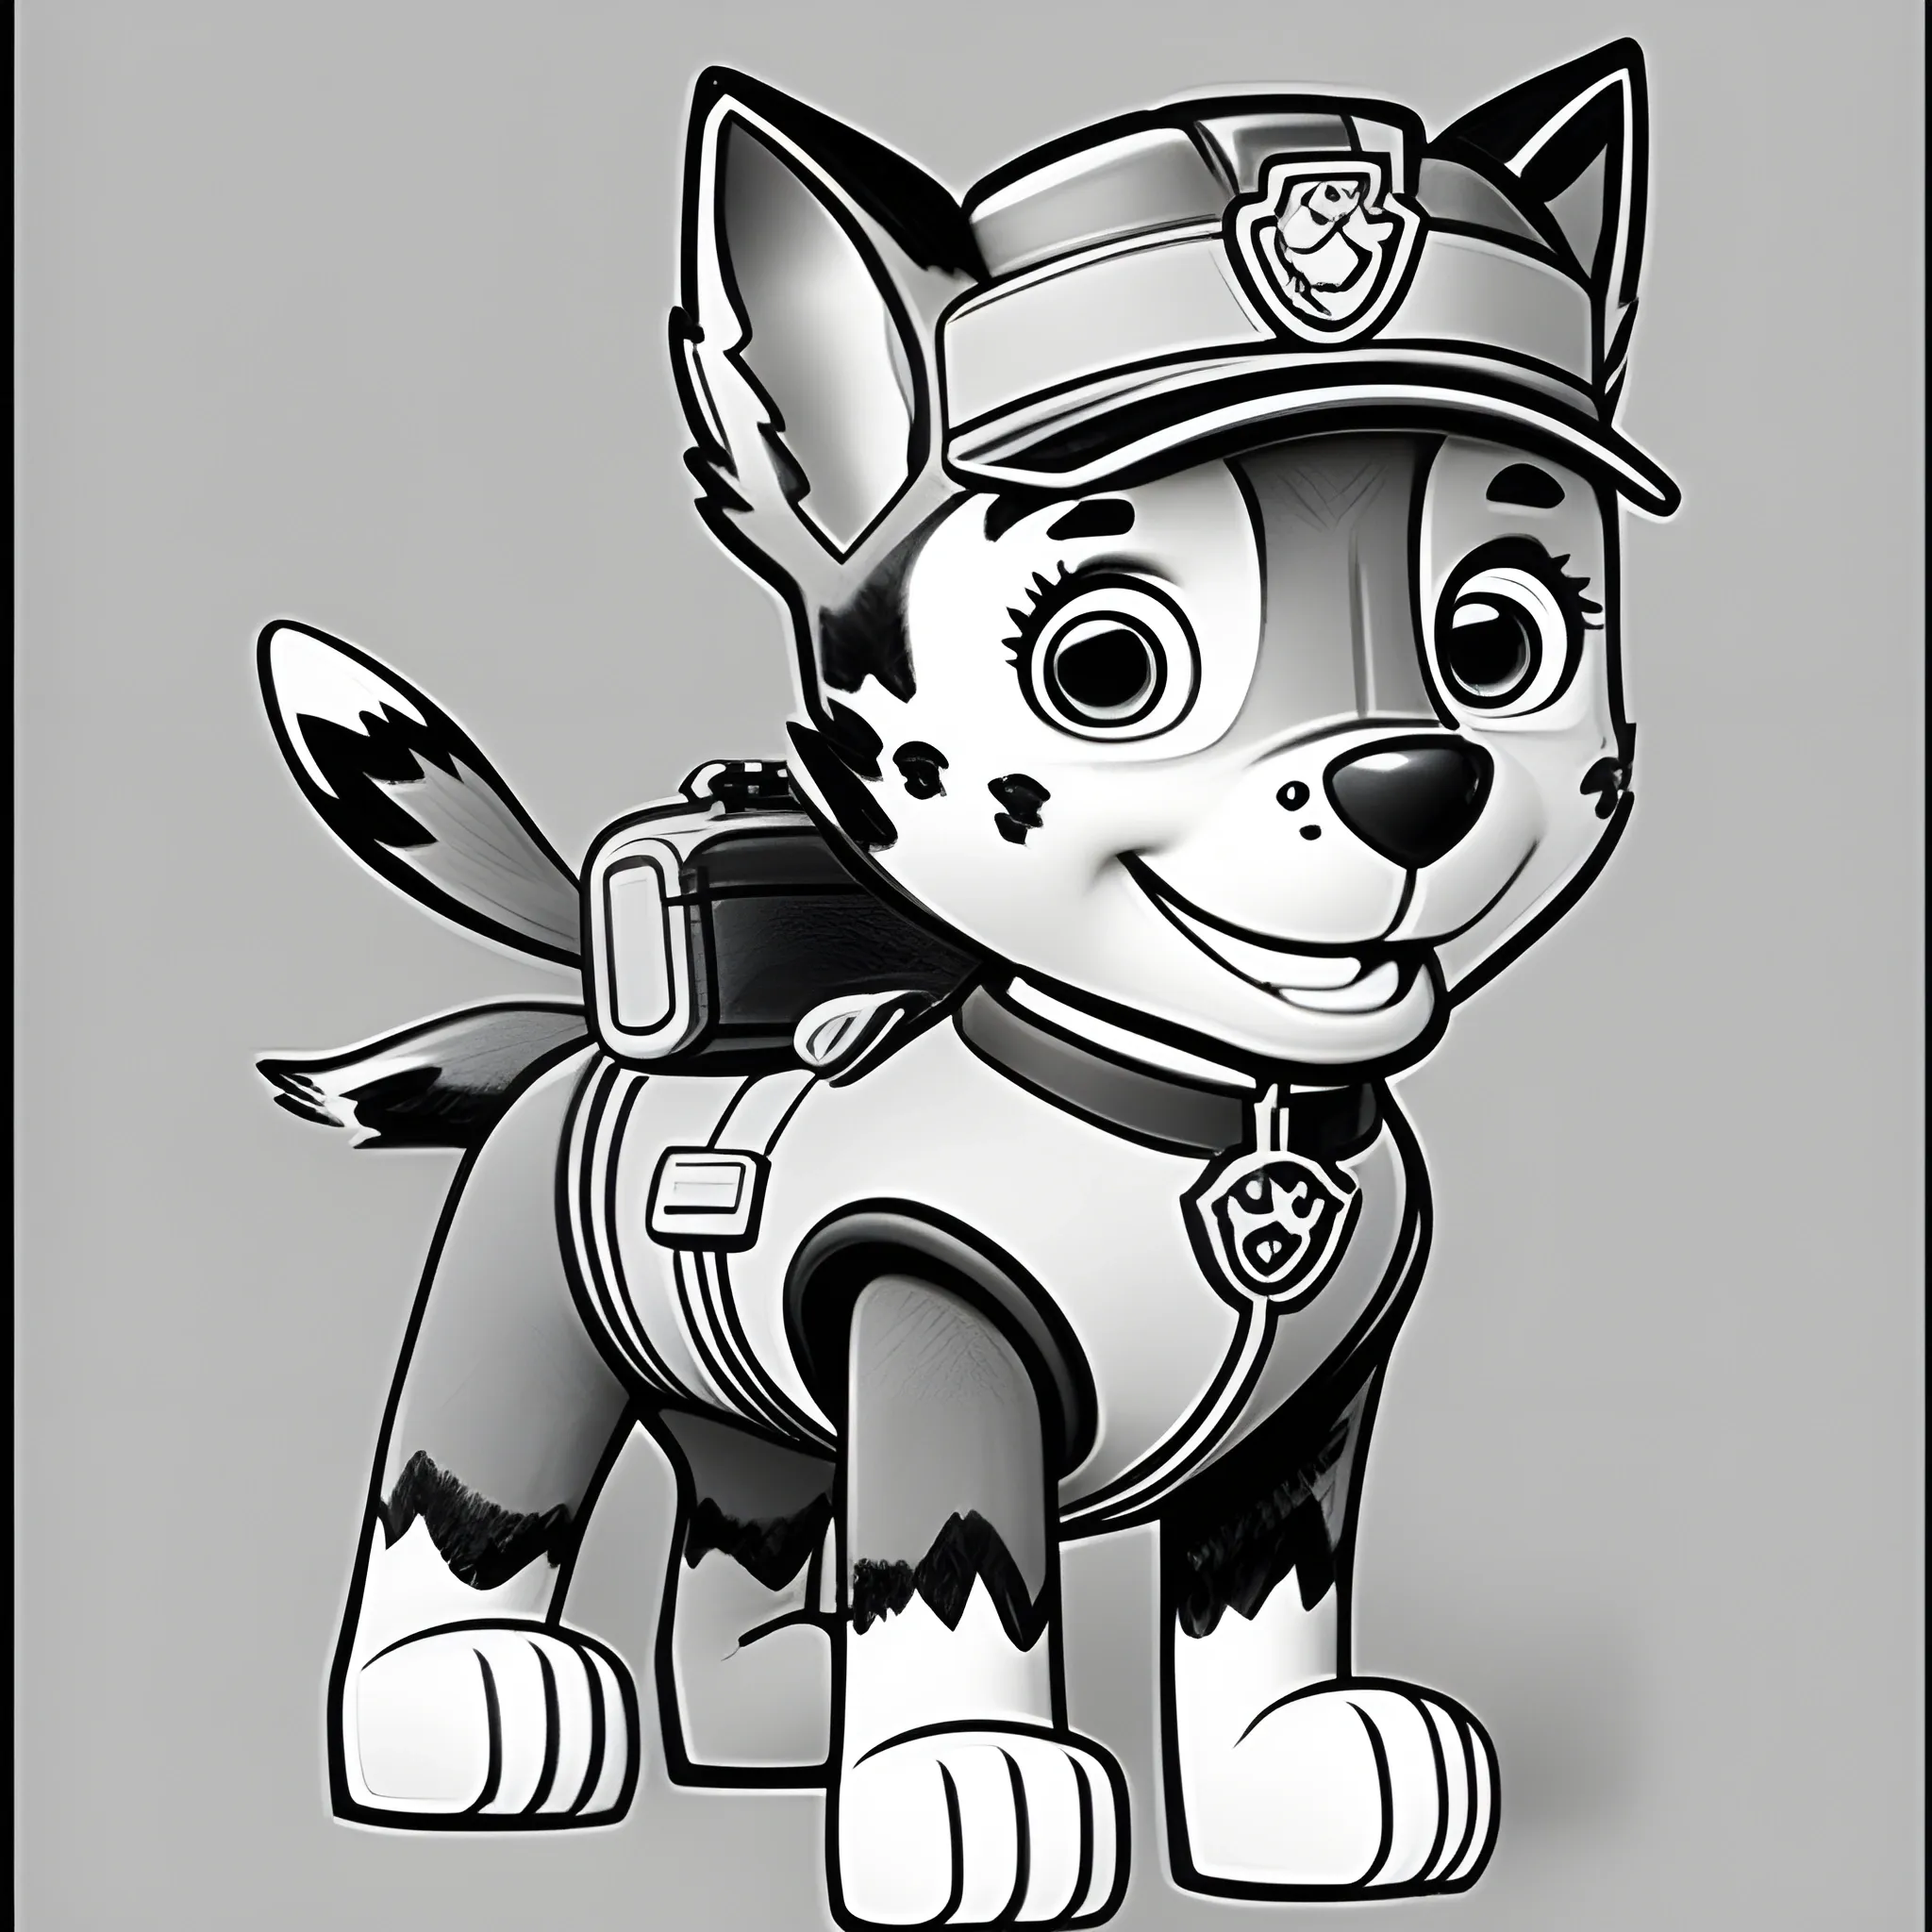 Free Paw Patrol Printables for Your Kids - Mama Likes This